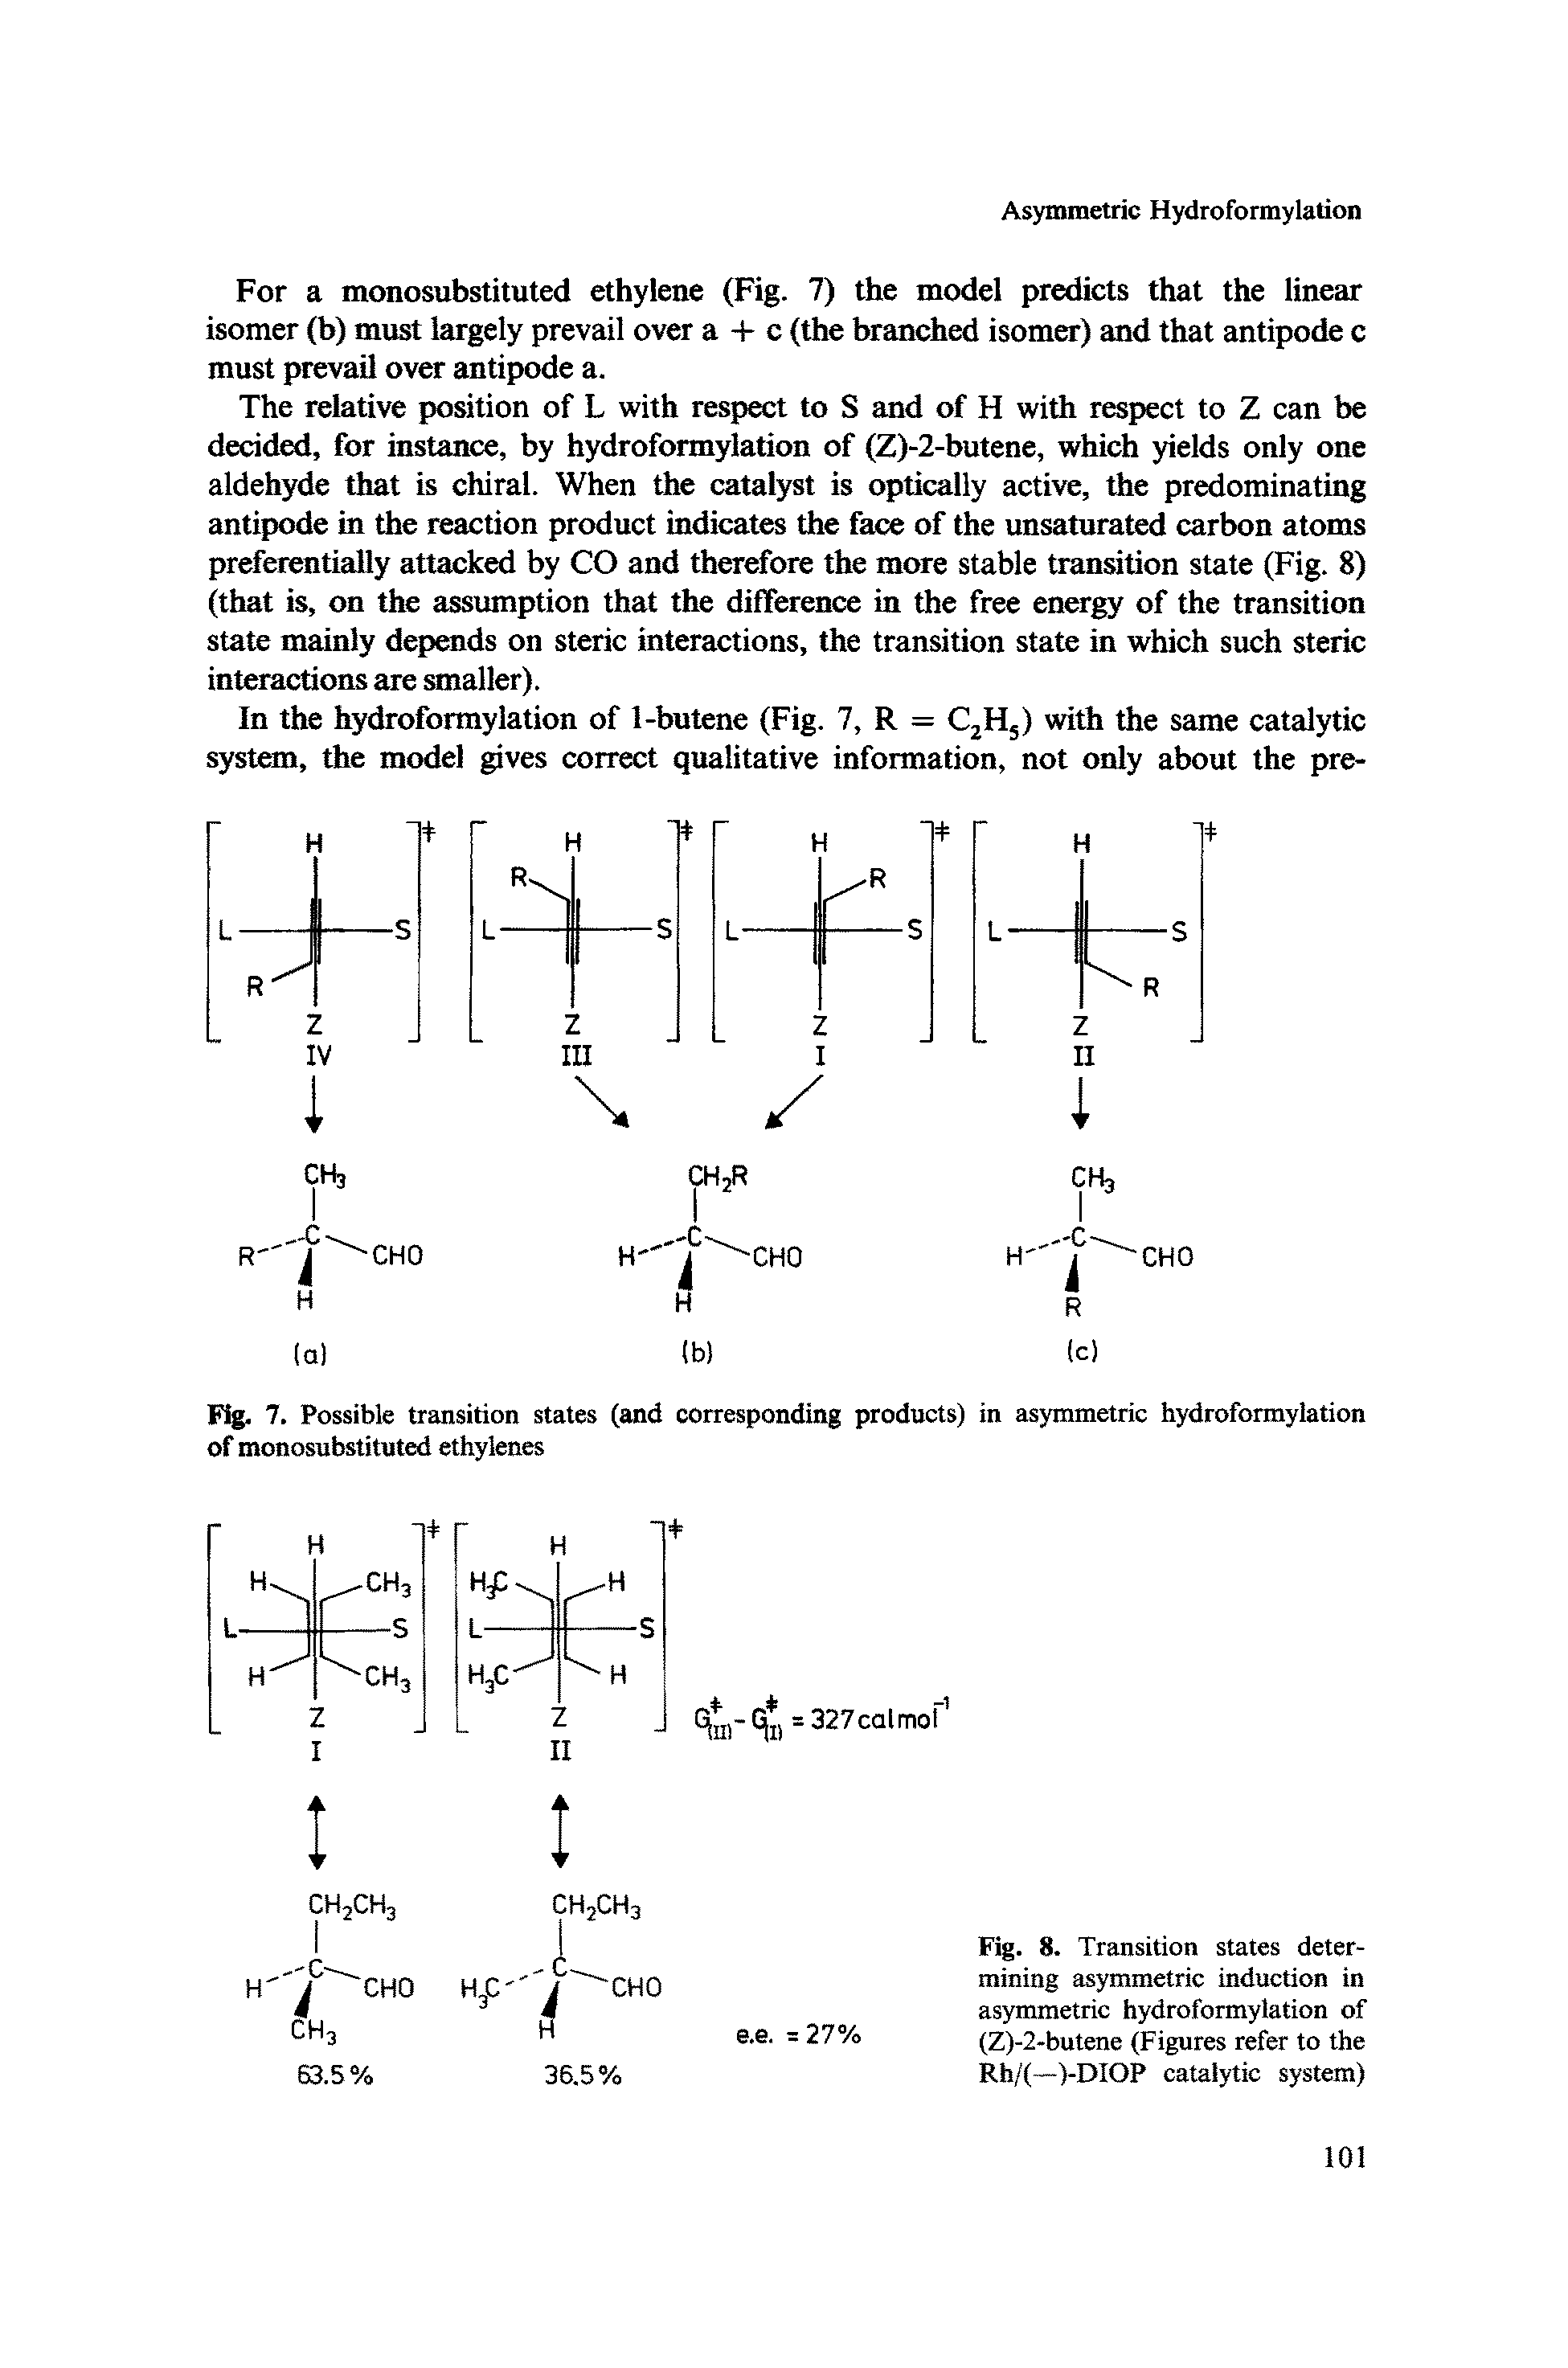 Fig. 8. Transition states determining asymmetric induction in asymmetric hydroformylation of (Z)-2-butene (Figures refer to the Rh/(—)-DIOP catalytic system)...